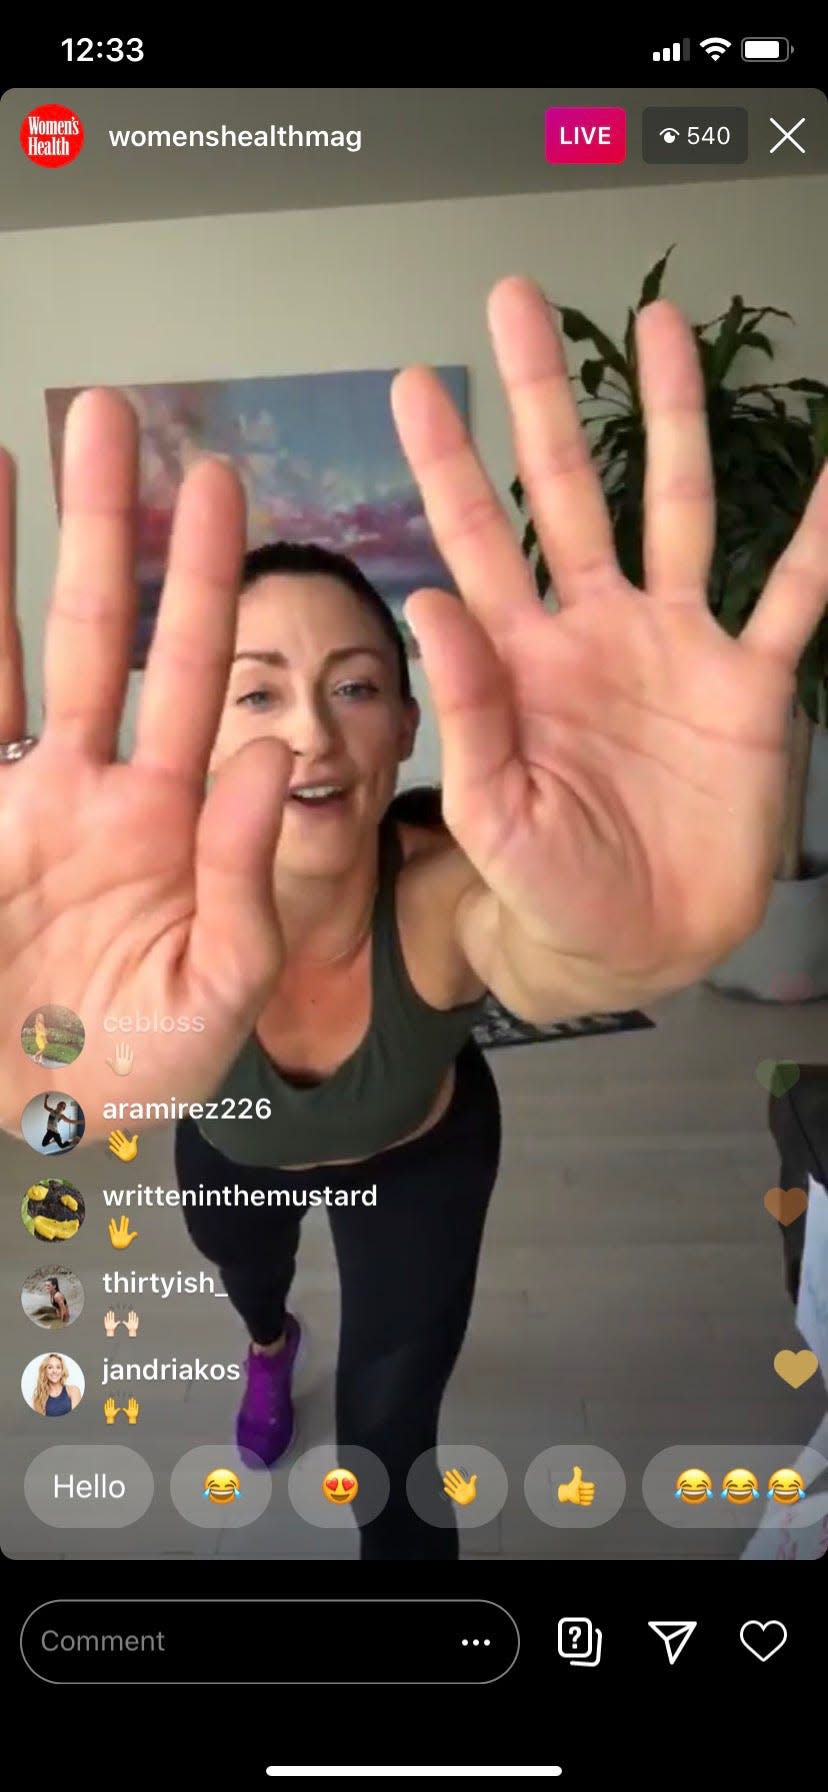 Trainer Kara Liotta gives virtual high fives during an Instagram Live workout on the @womenshealthmag page.